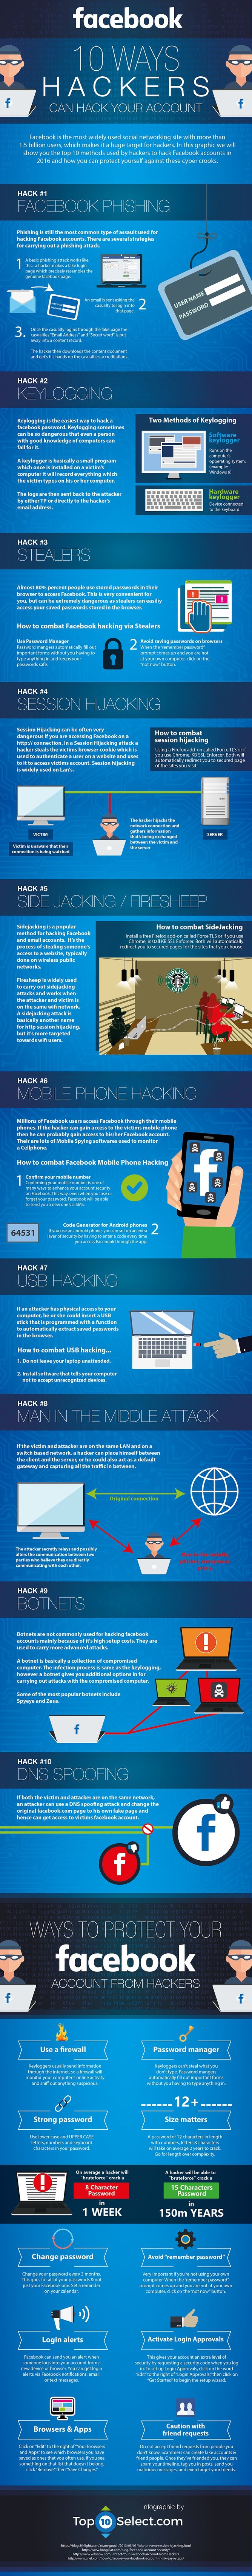 10 ways info to protect your social media accounts